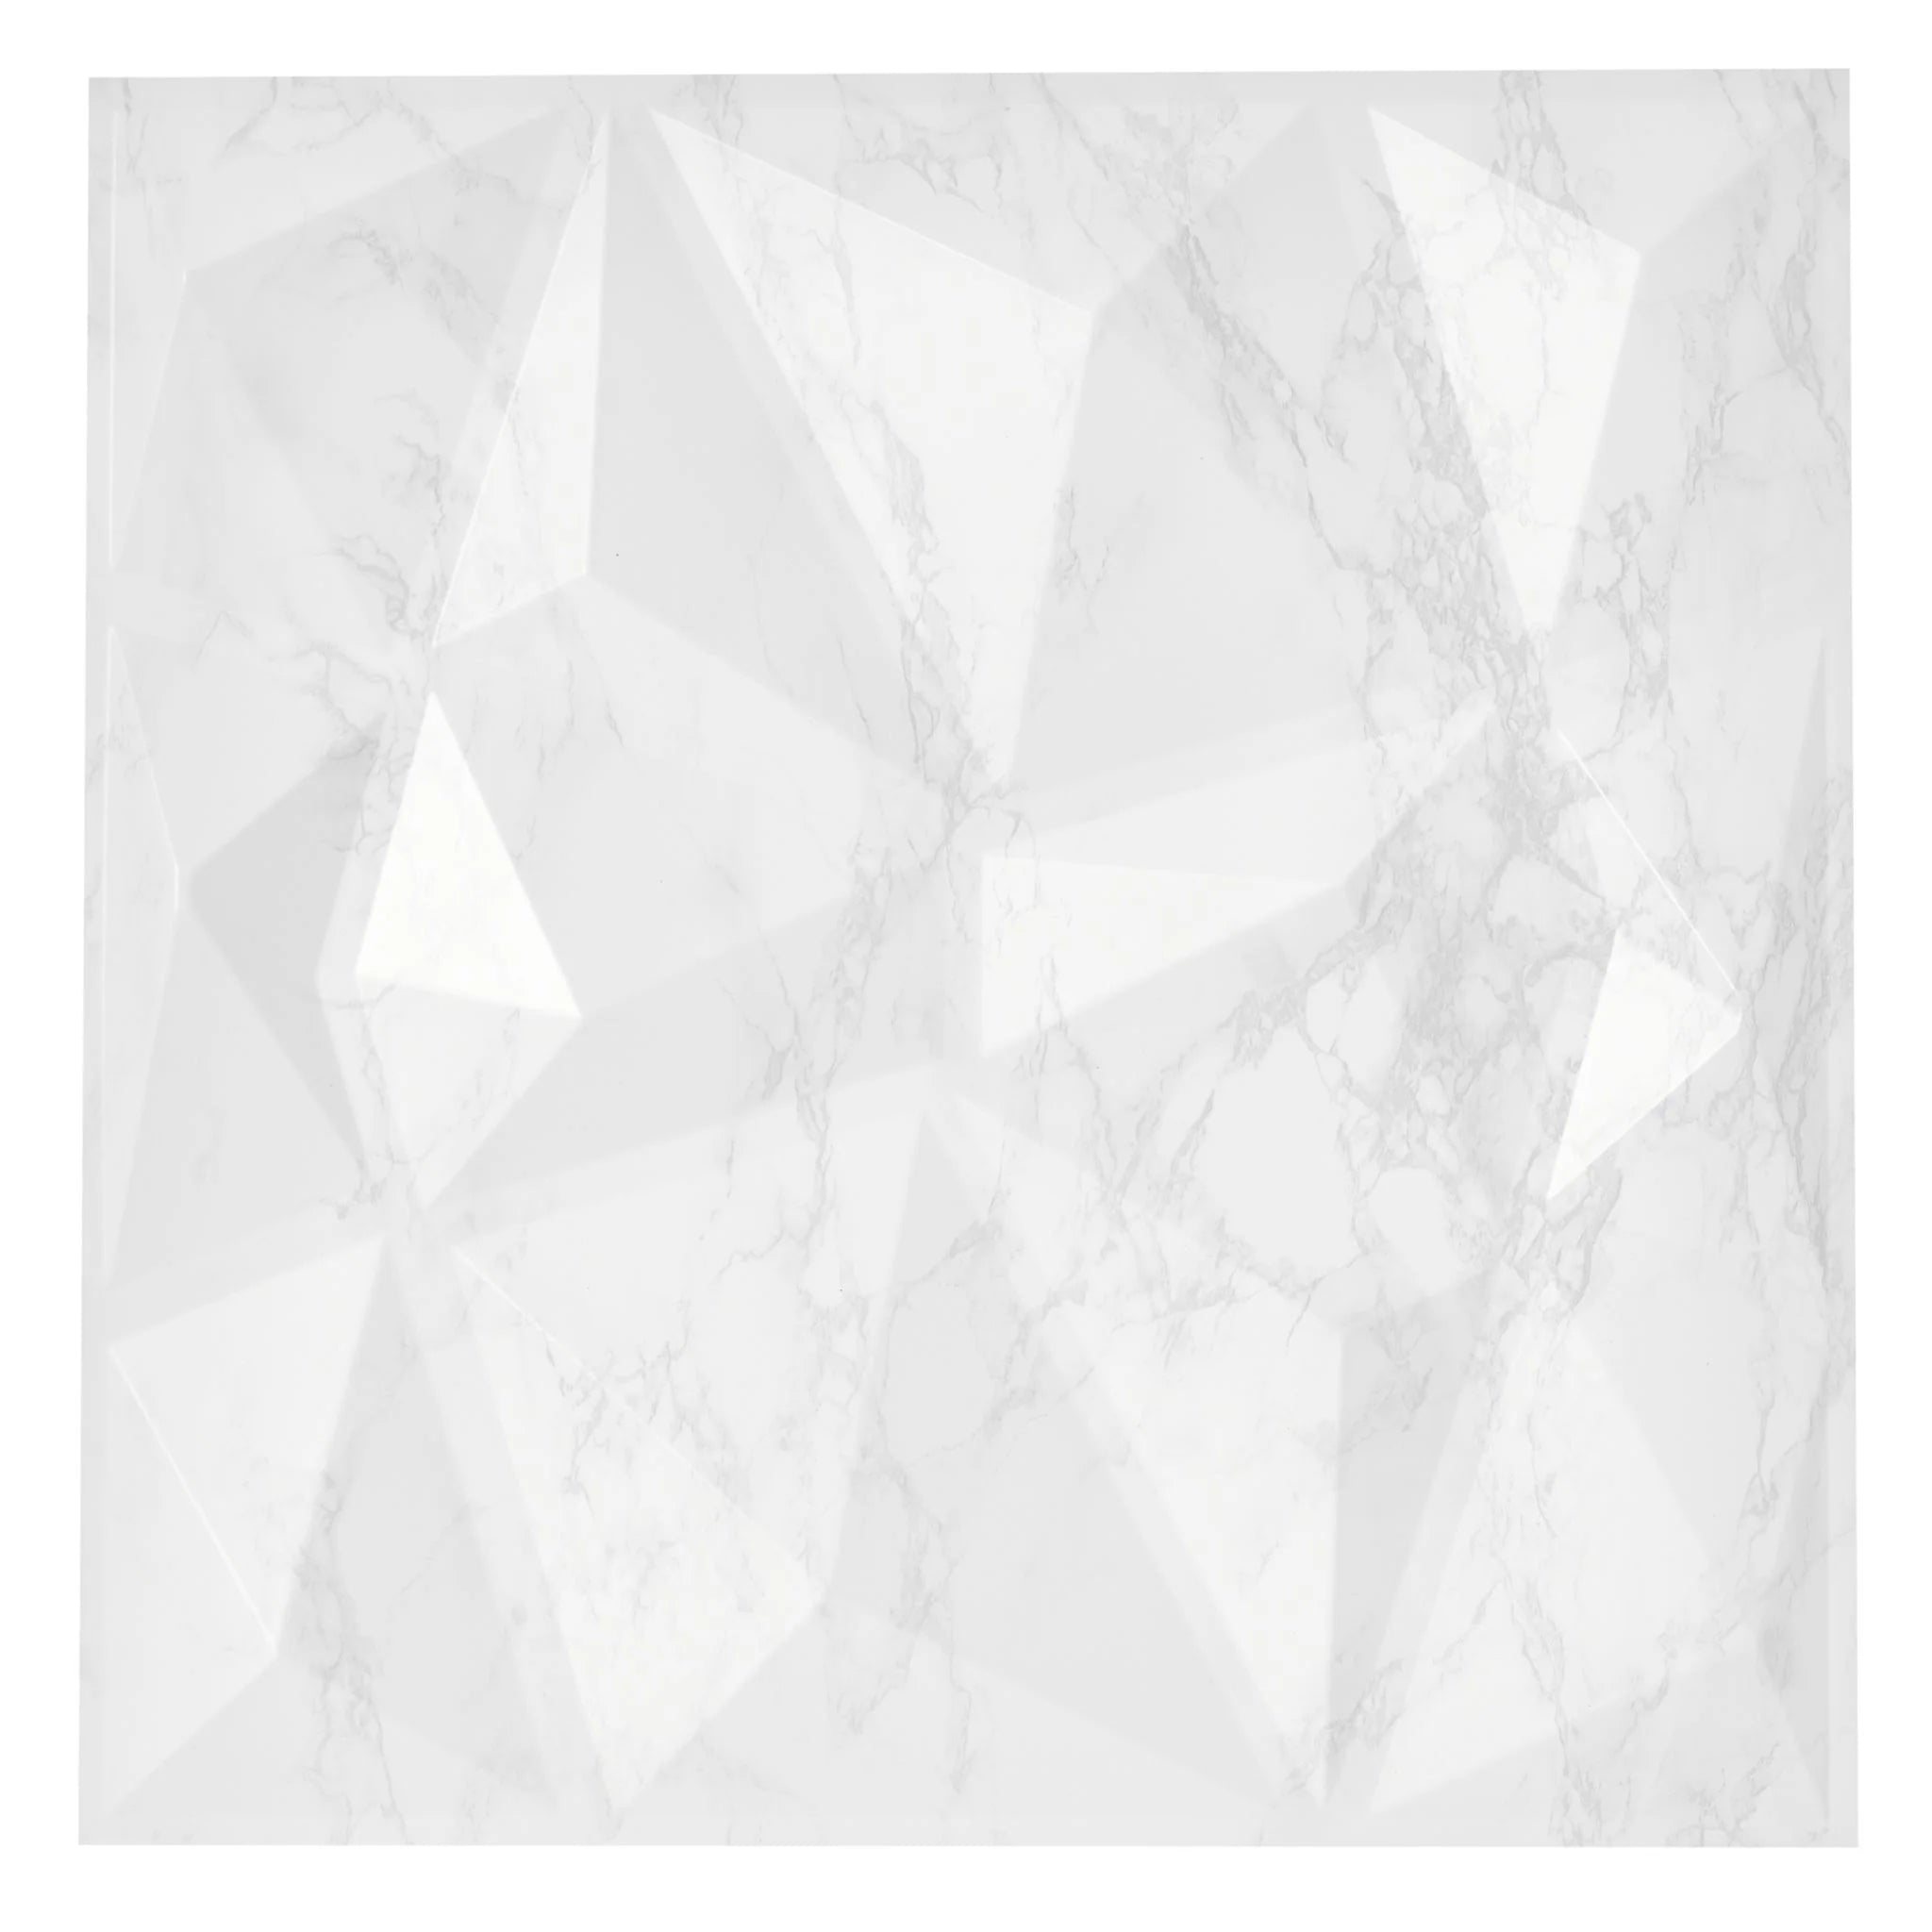 White PVC wall panel with geometric patterns, close-up view